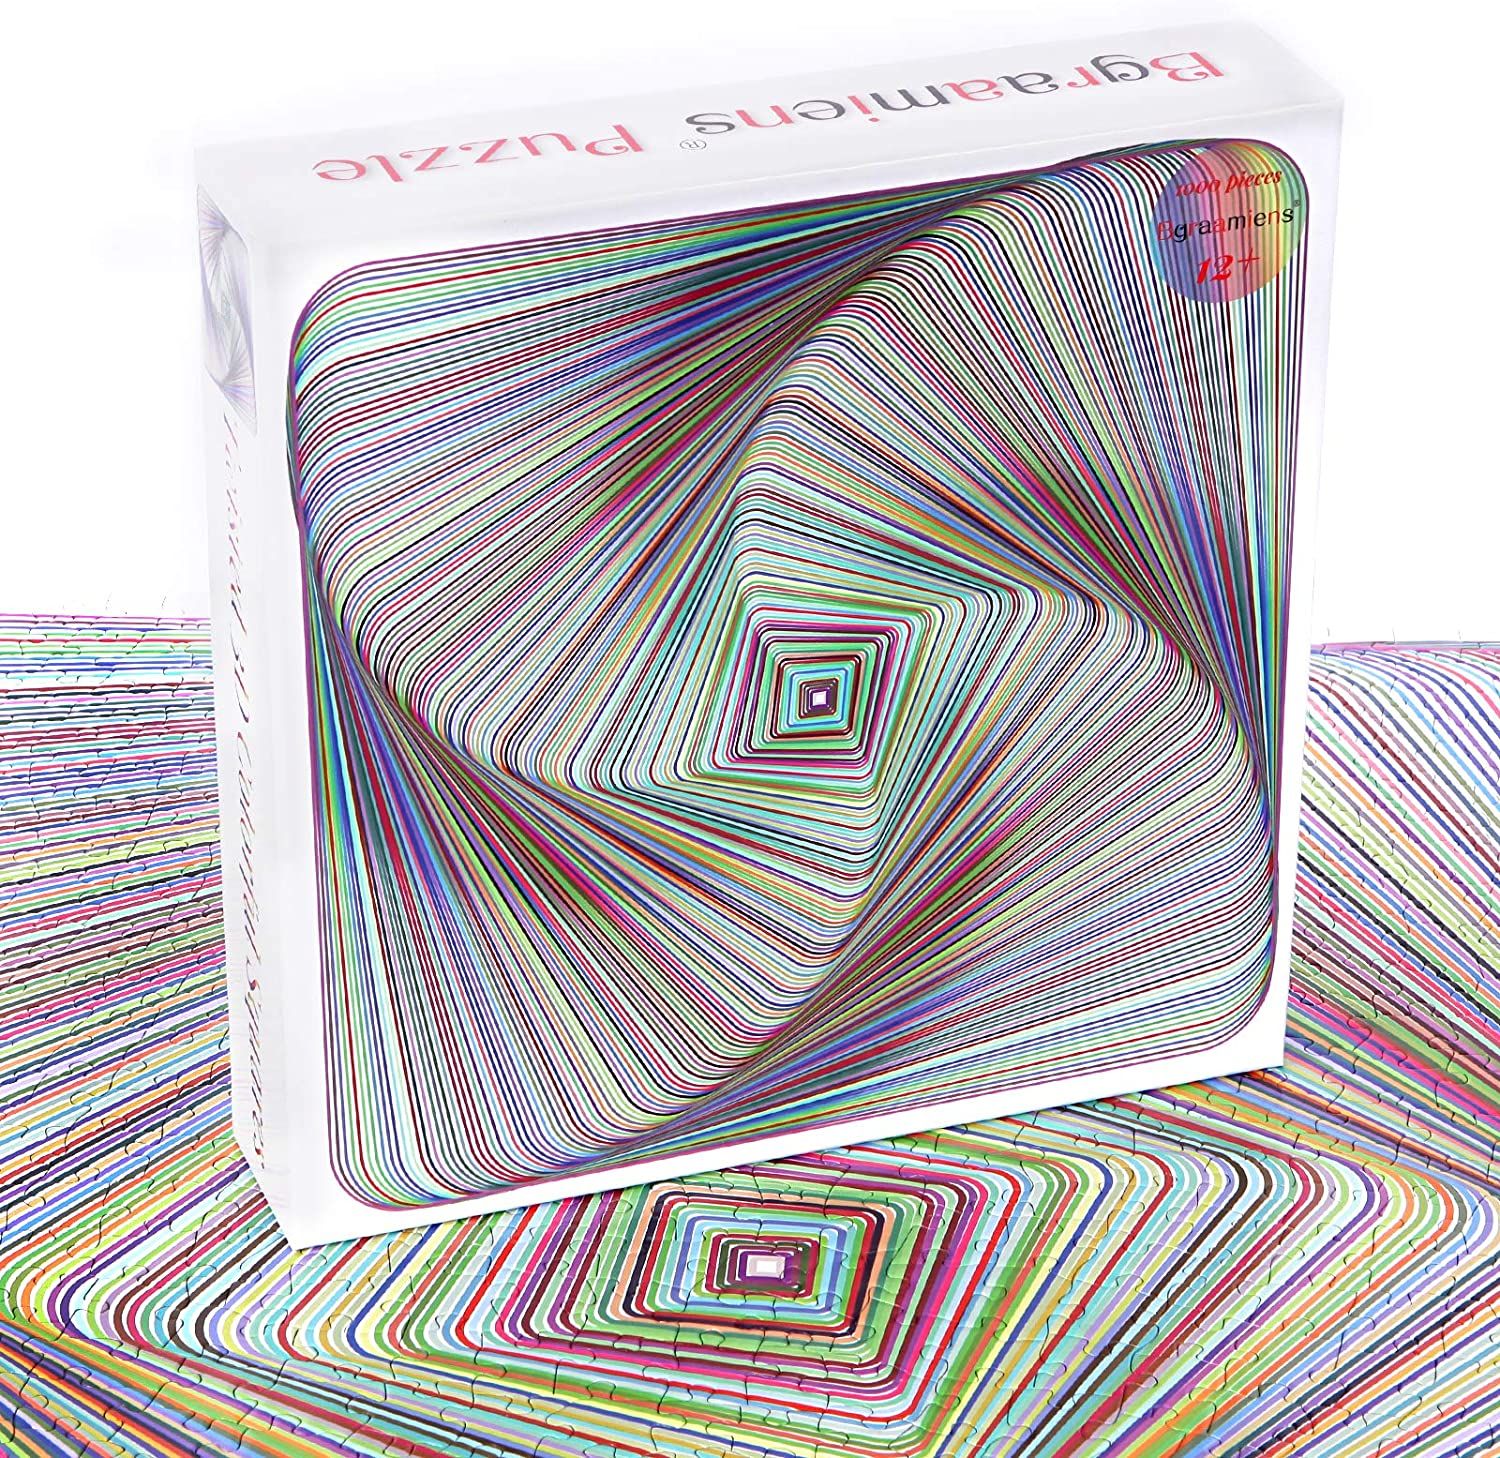 BGRAAMIENS Twisted 3D Colorful 1000 Pieces Square Puzzle 4